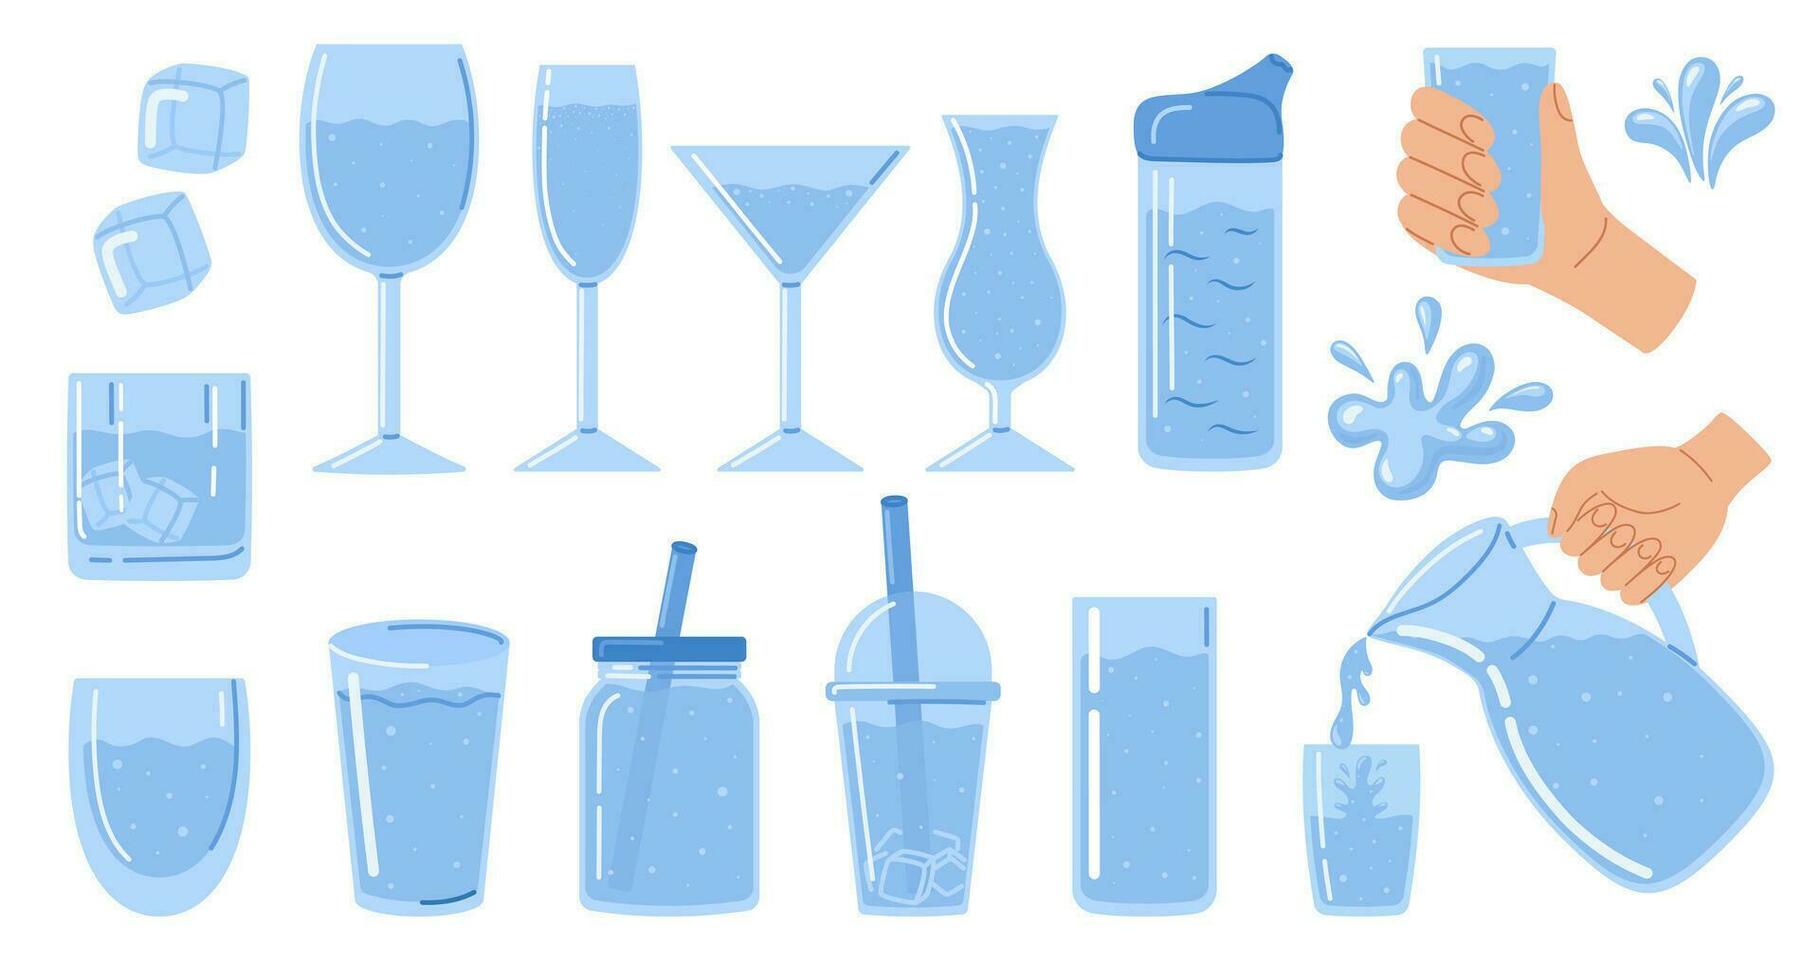 Water set. Drinking water in different plastic and glass glasses, goblet, decanter. Water drops, ice cubes and splash. H2O. Vector illustration in doodle style